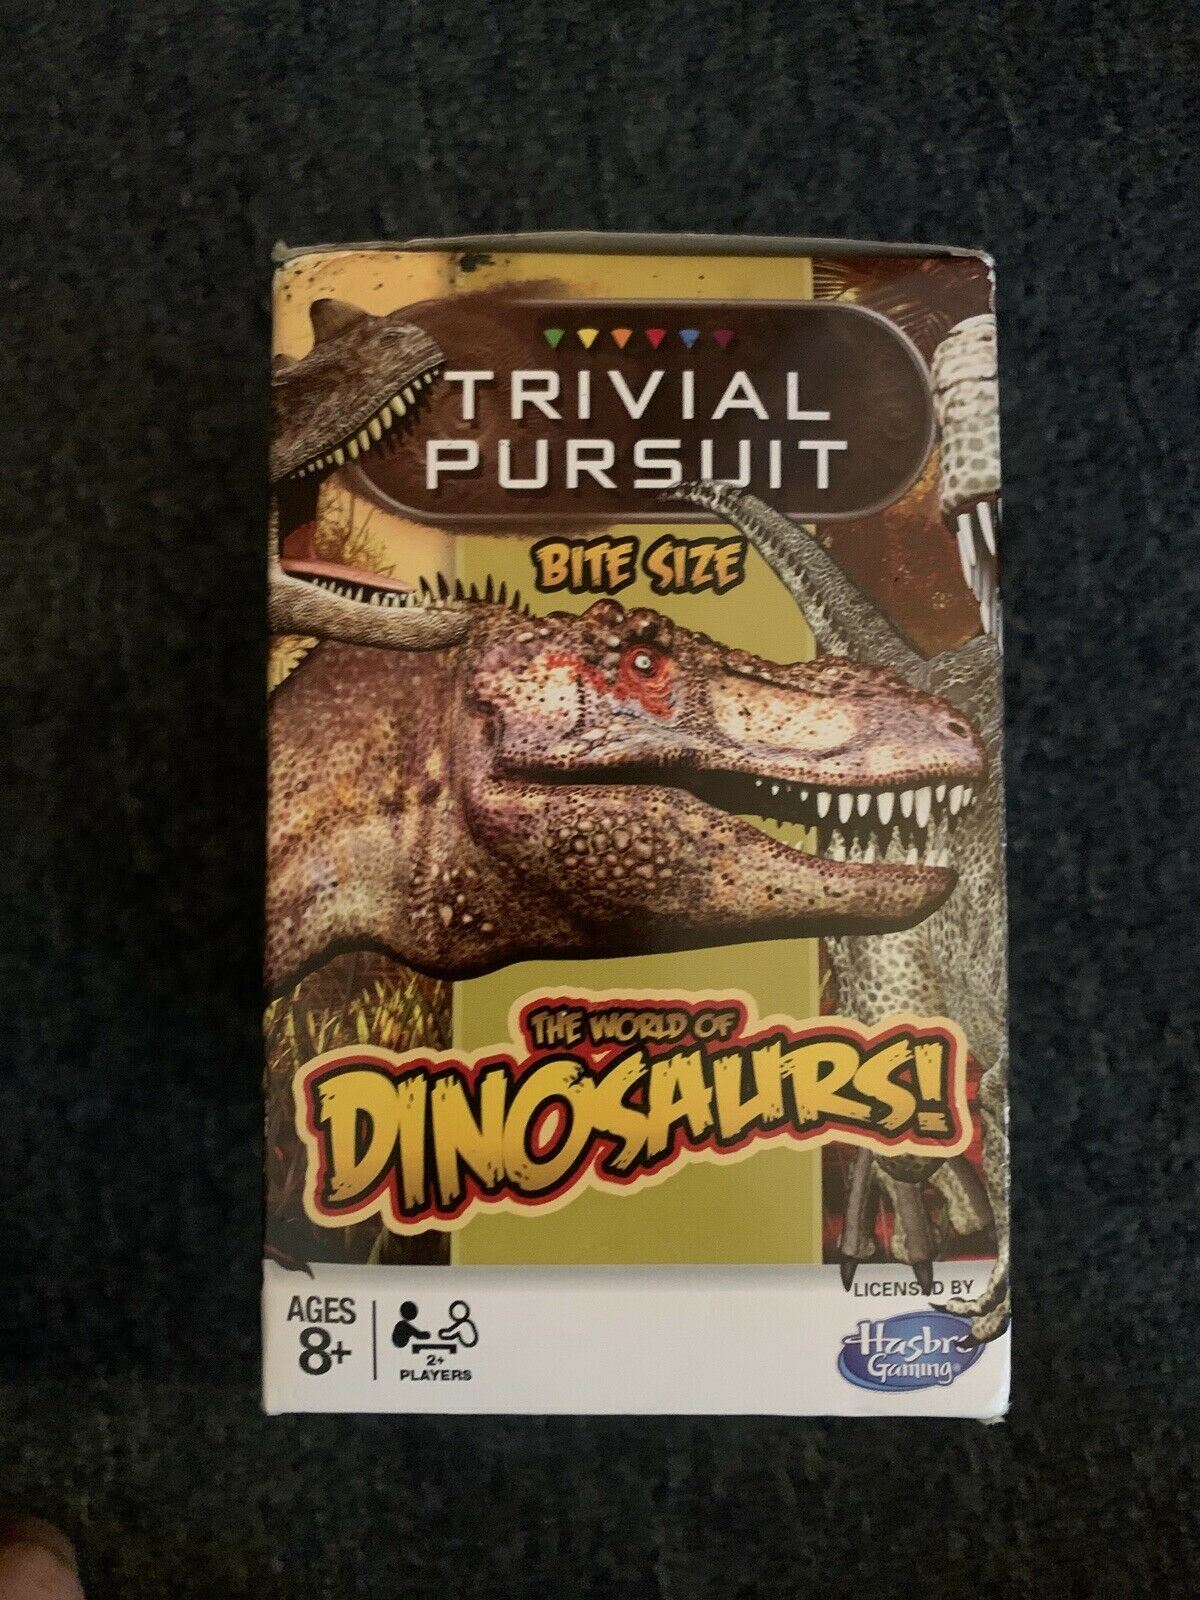 *NEW* Hasbro Trivial Pursuit The World of Dinosaurs Board Trivia Game